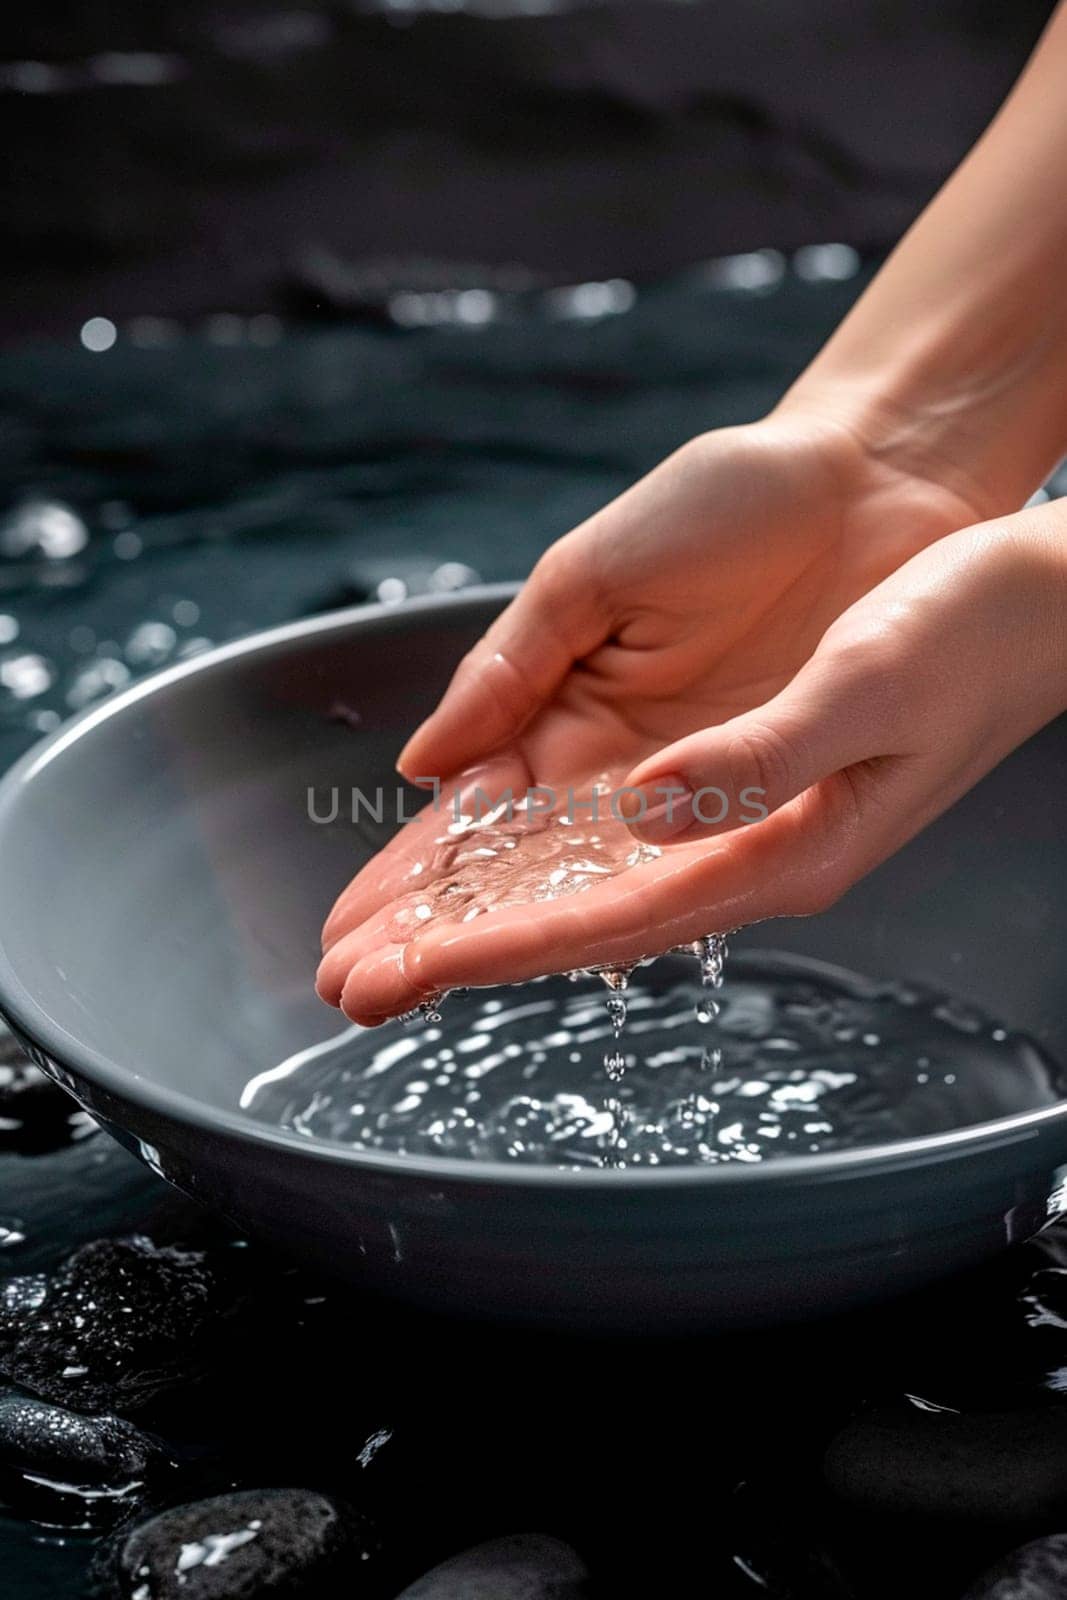 Woman's hands taking hand bath in spa salon. Selective focus. Nature.